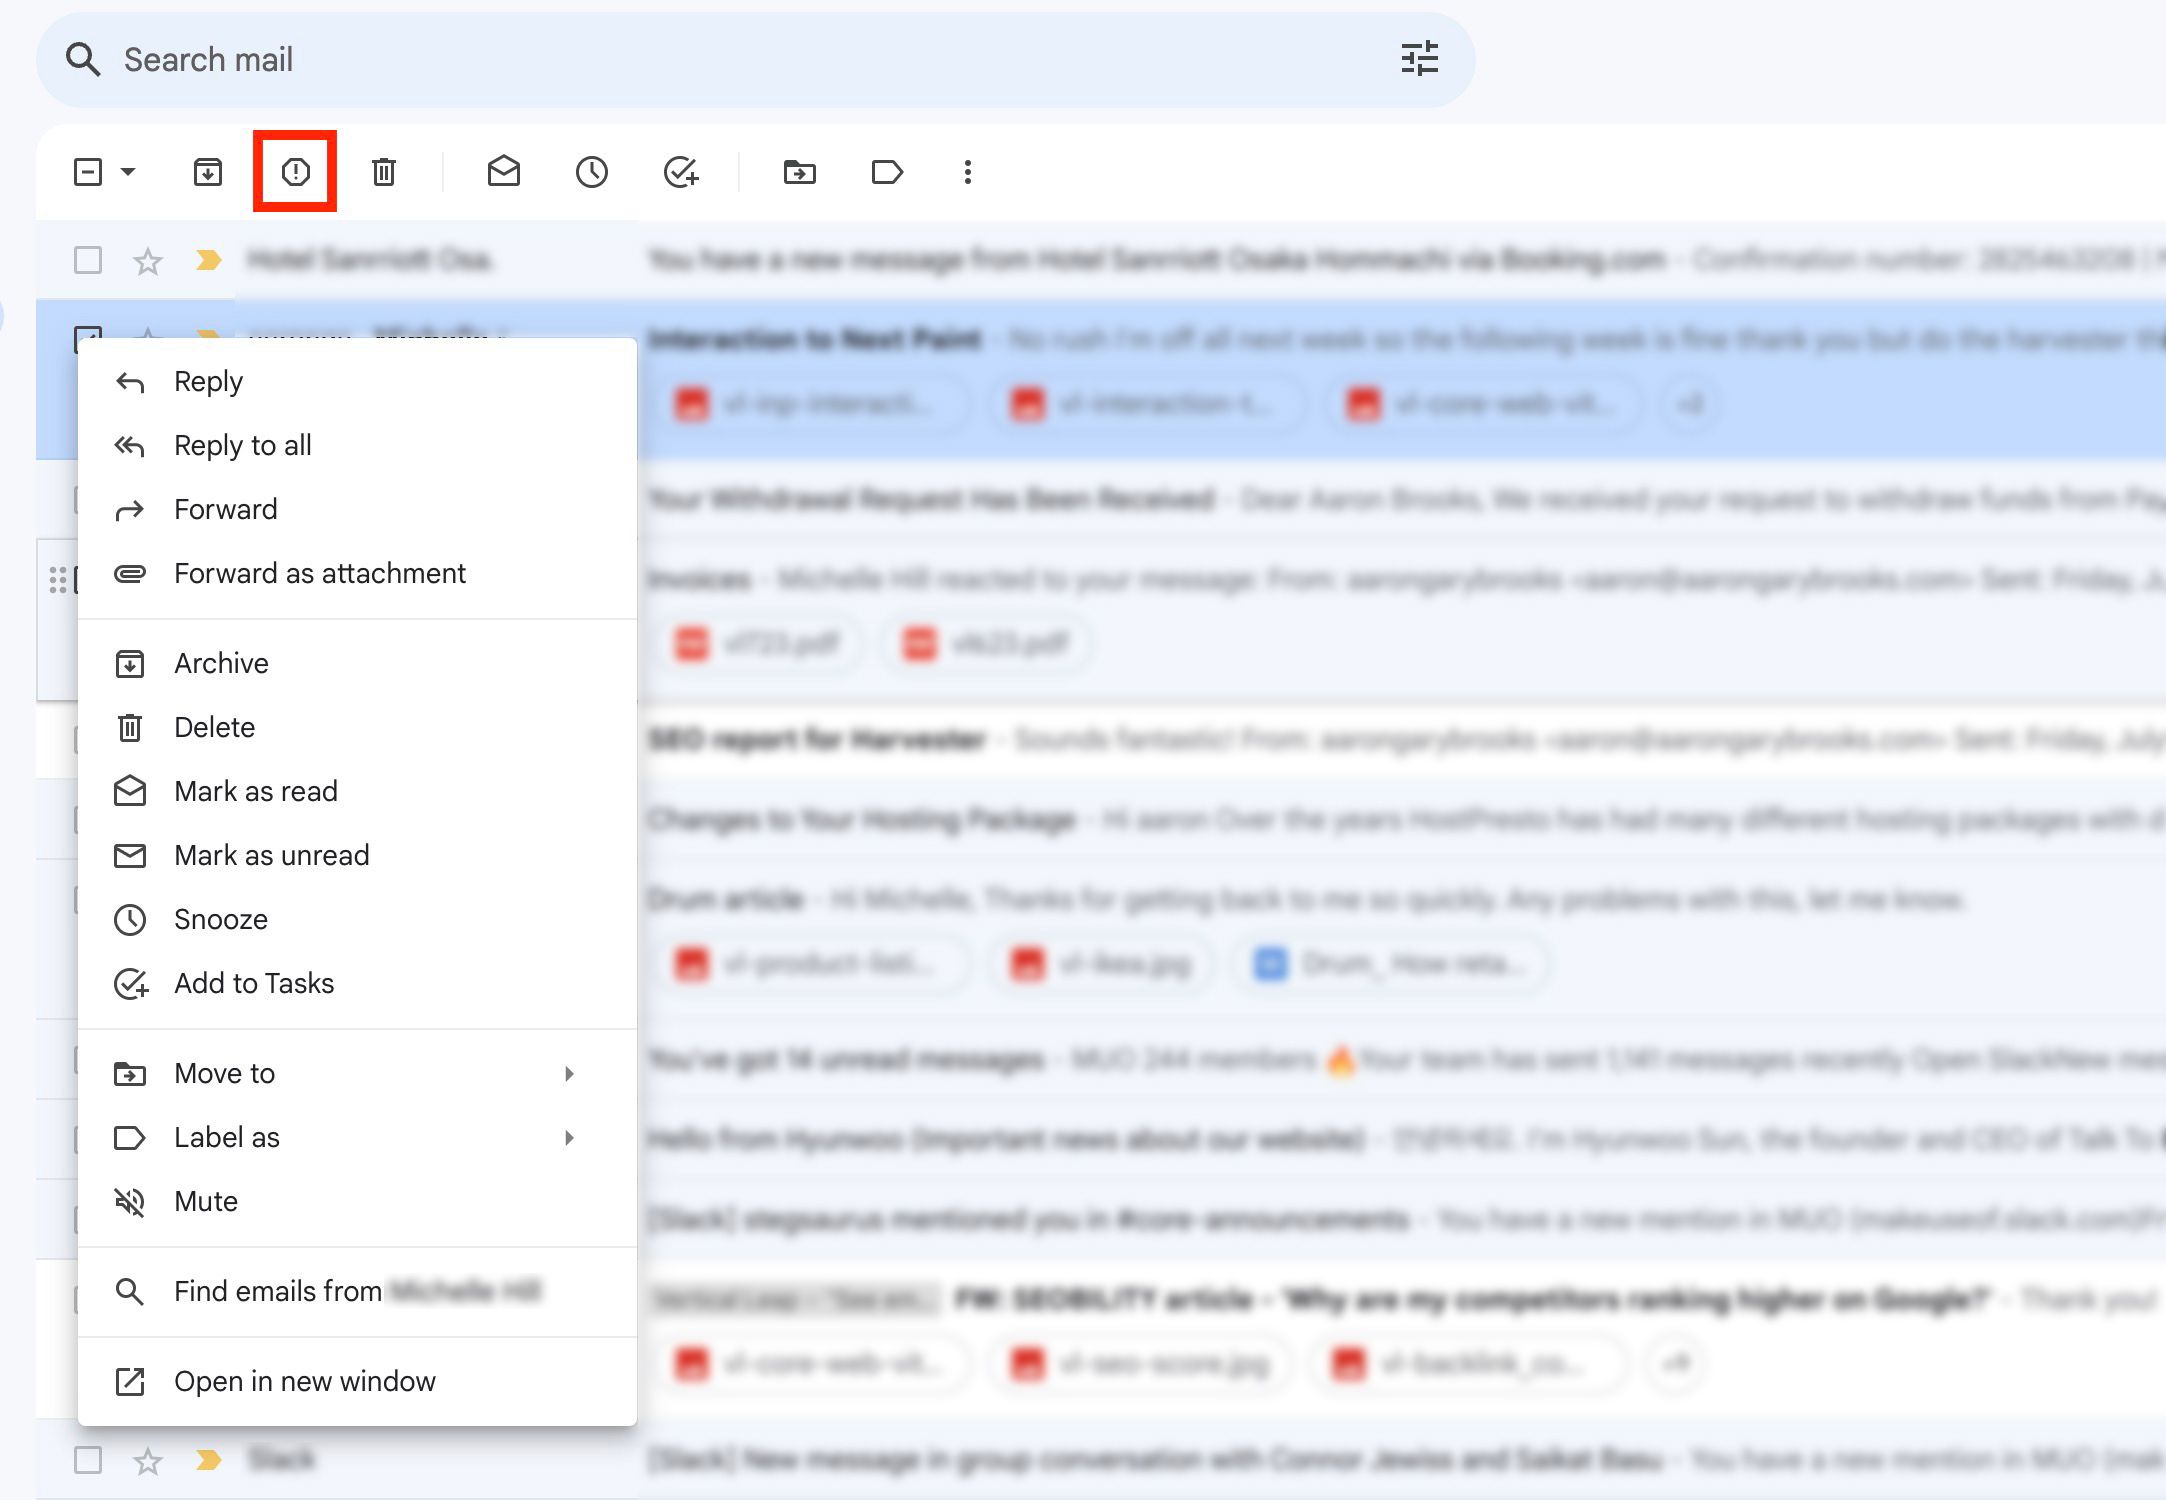 how to report spam in Gmail